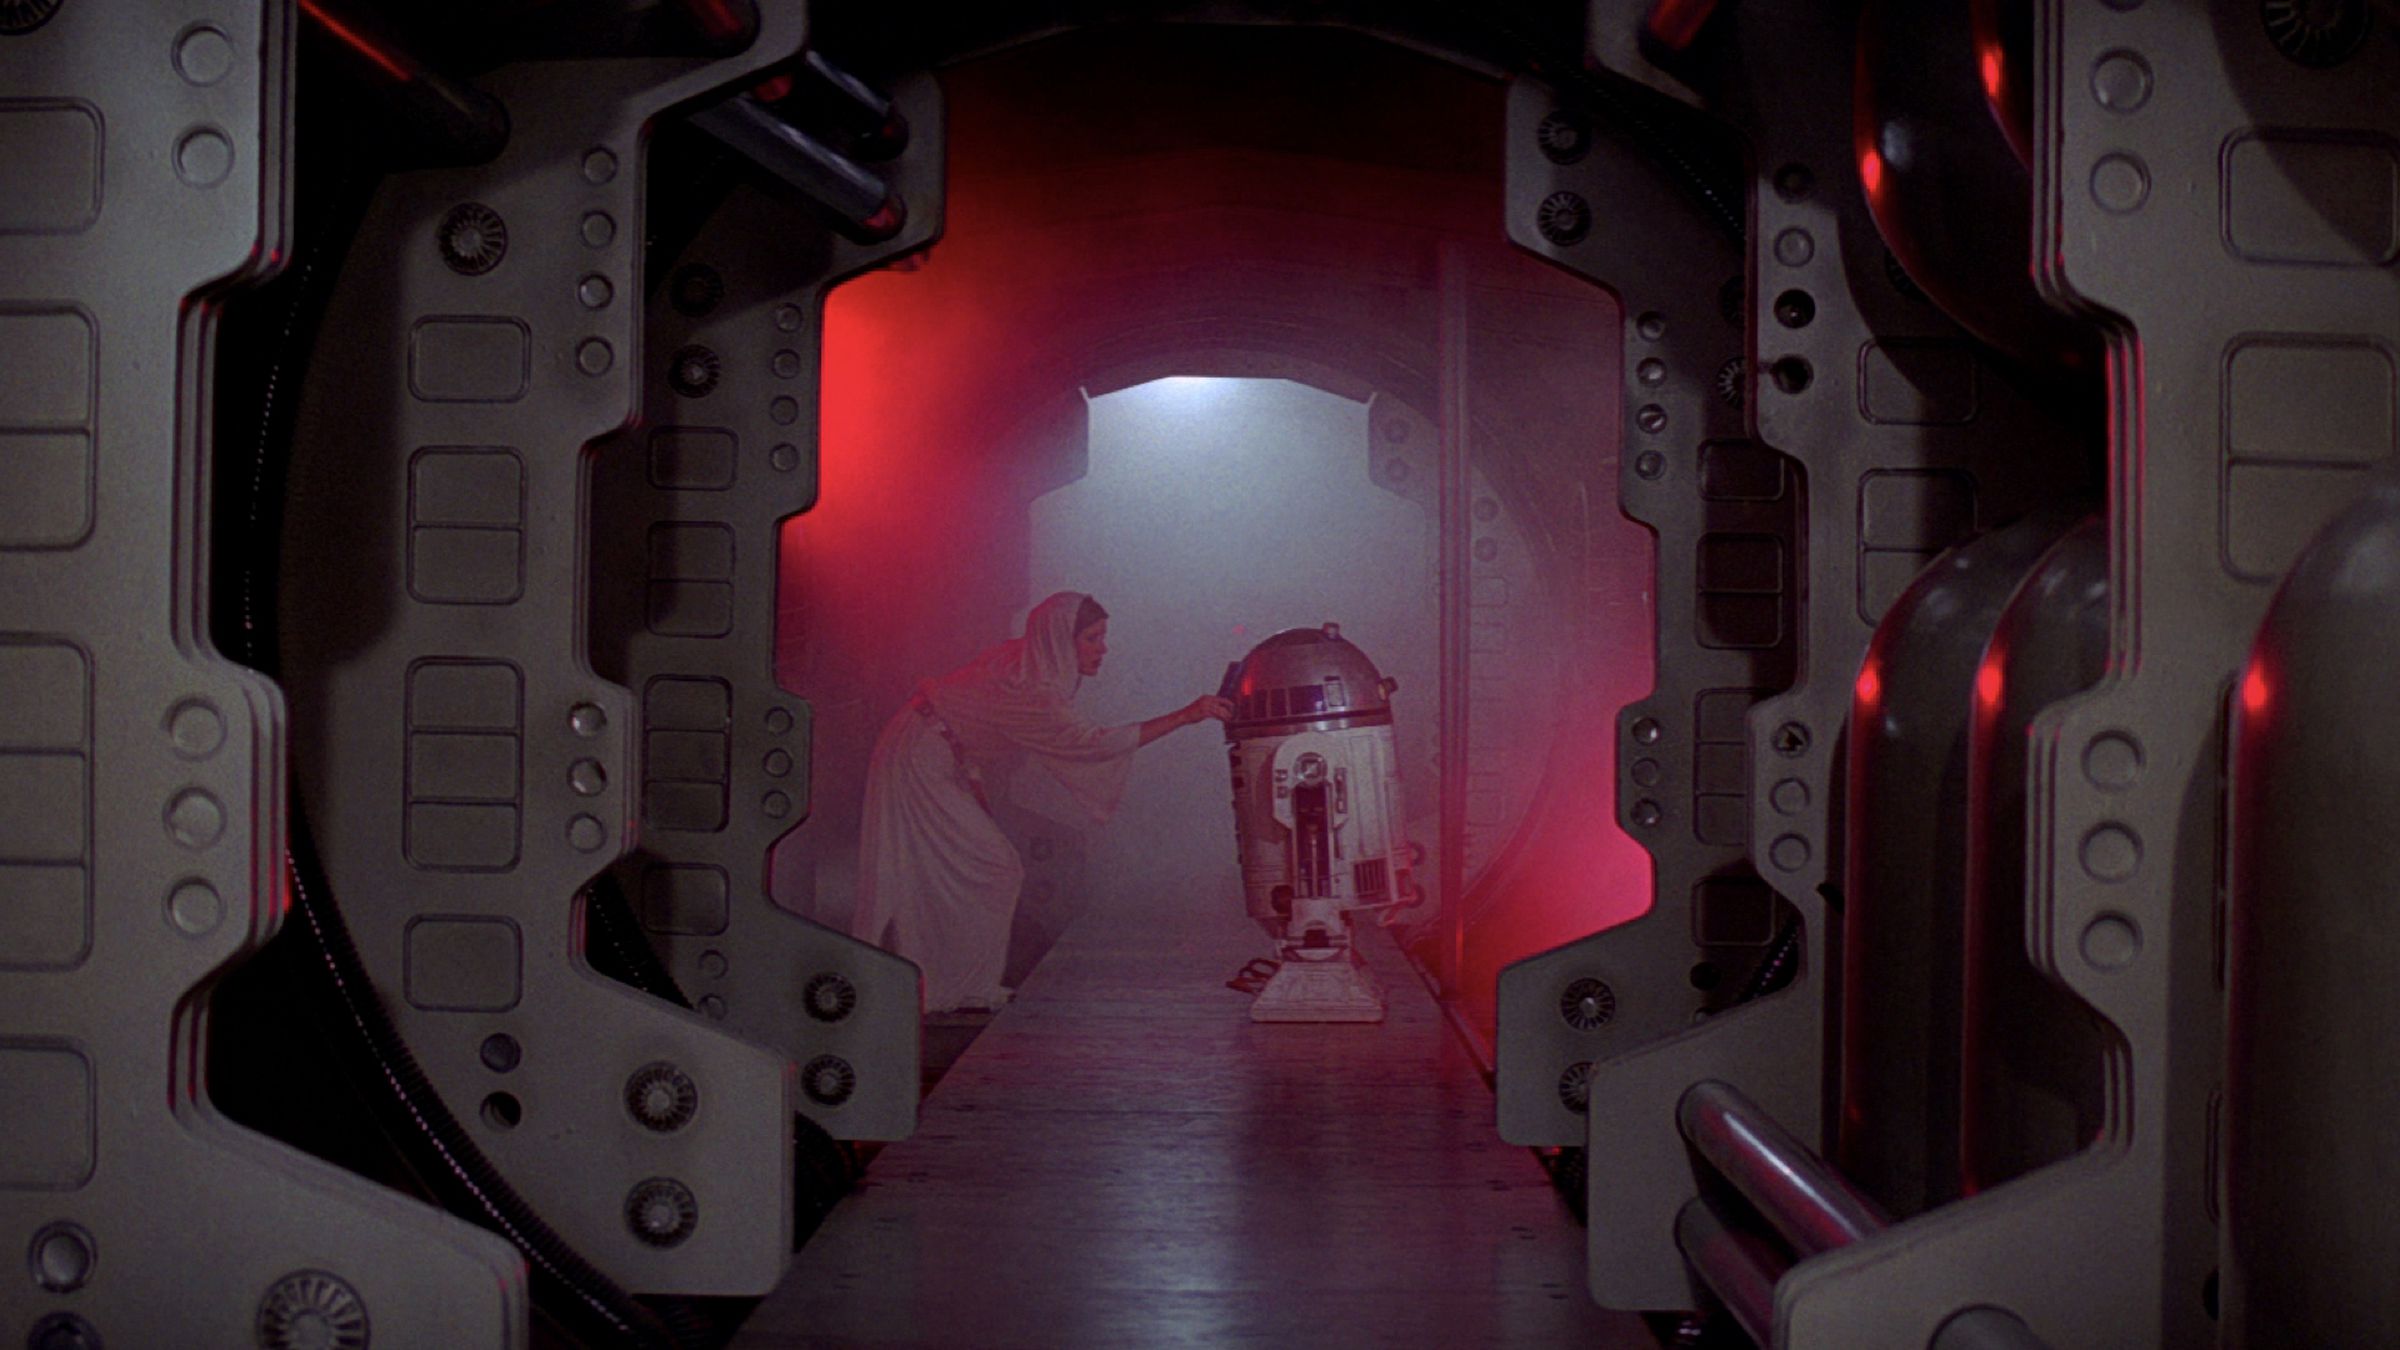 Leia gives the disk to R2-D2 in the opening of A New Hope.